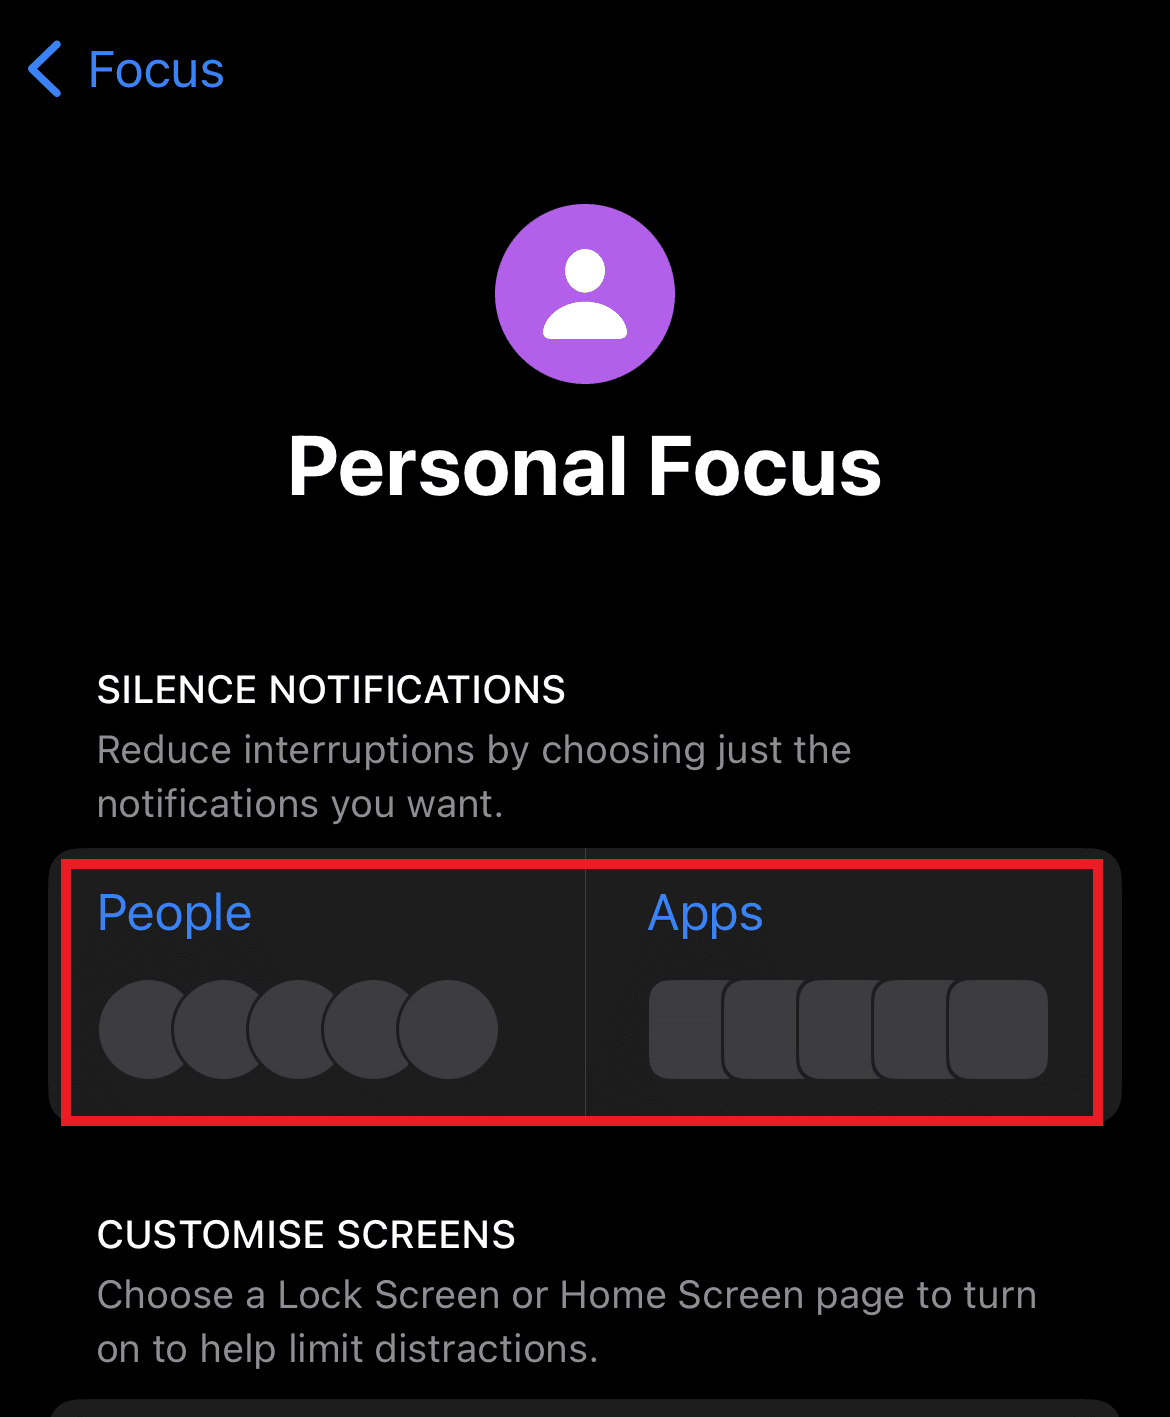 Set up your Focus for the People and Apps